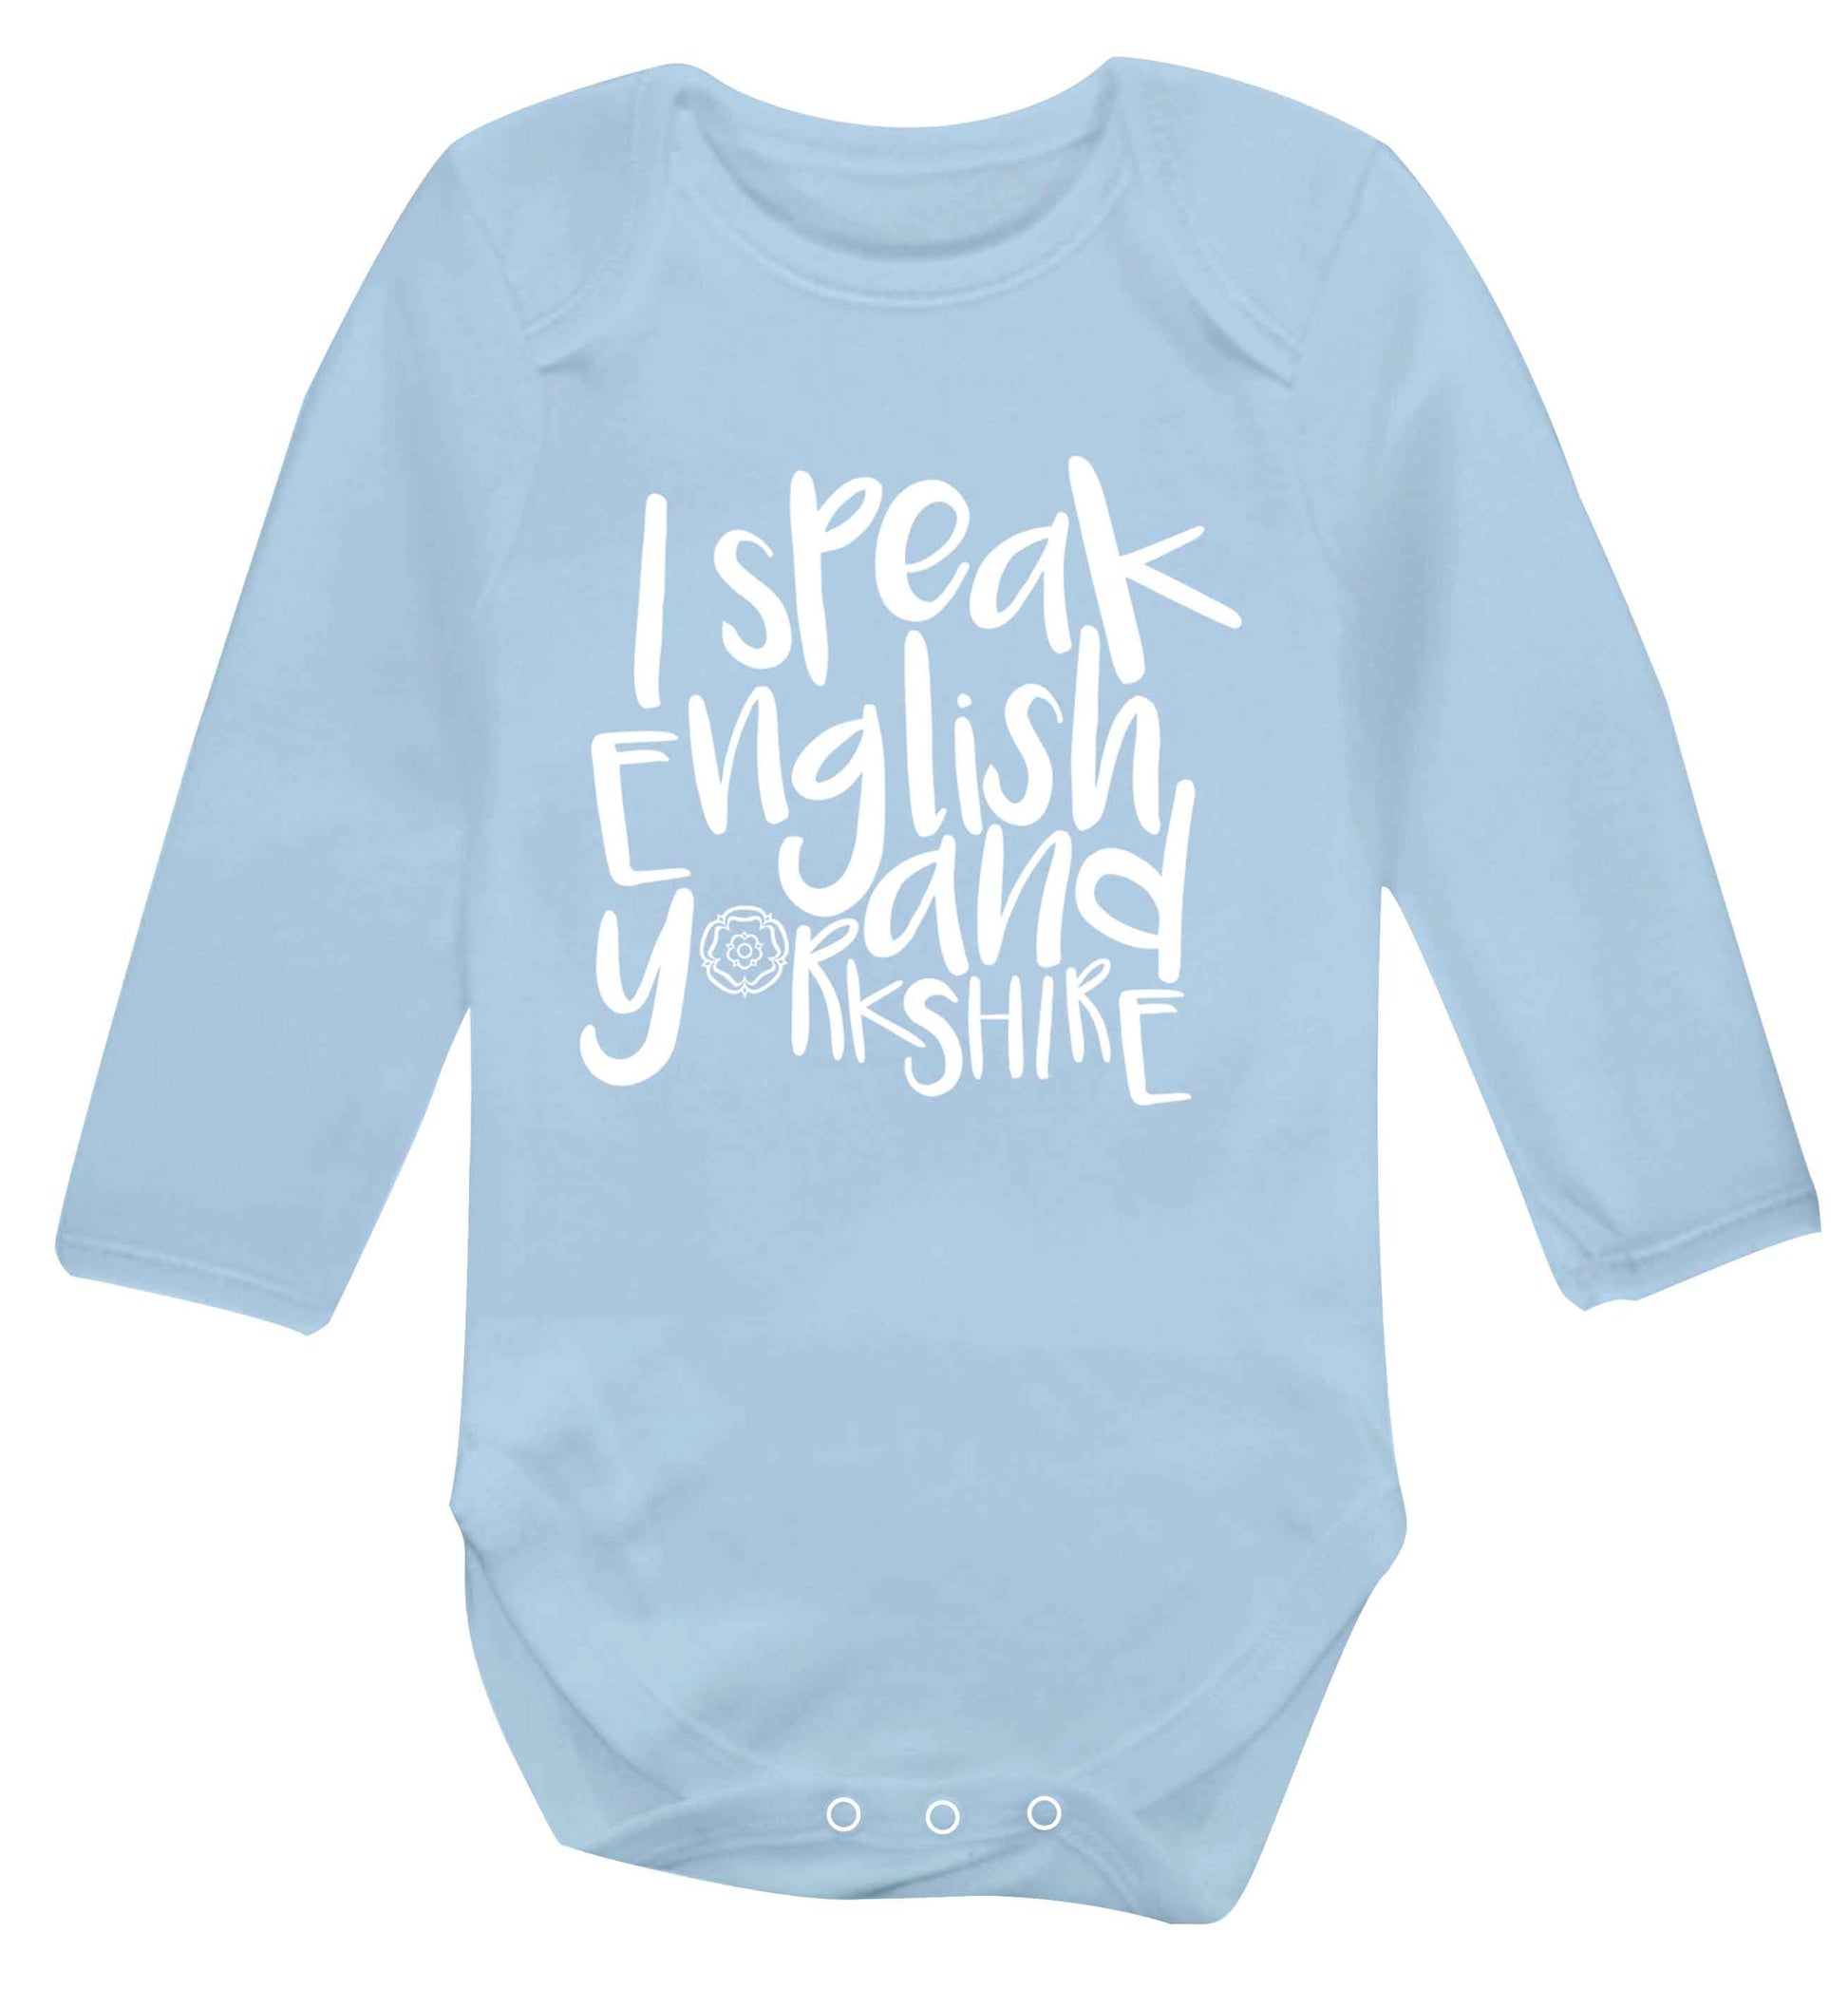 I speak English and Yorkshire Baby Vest long sleeved pale blue 6-12 months